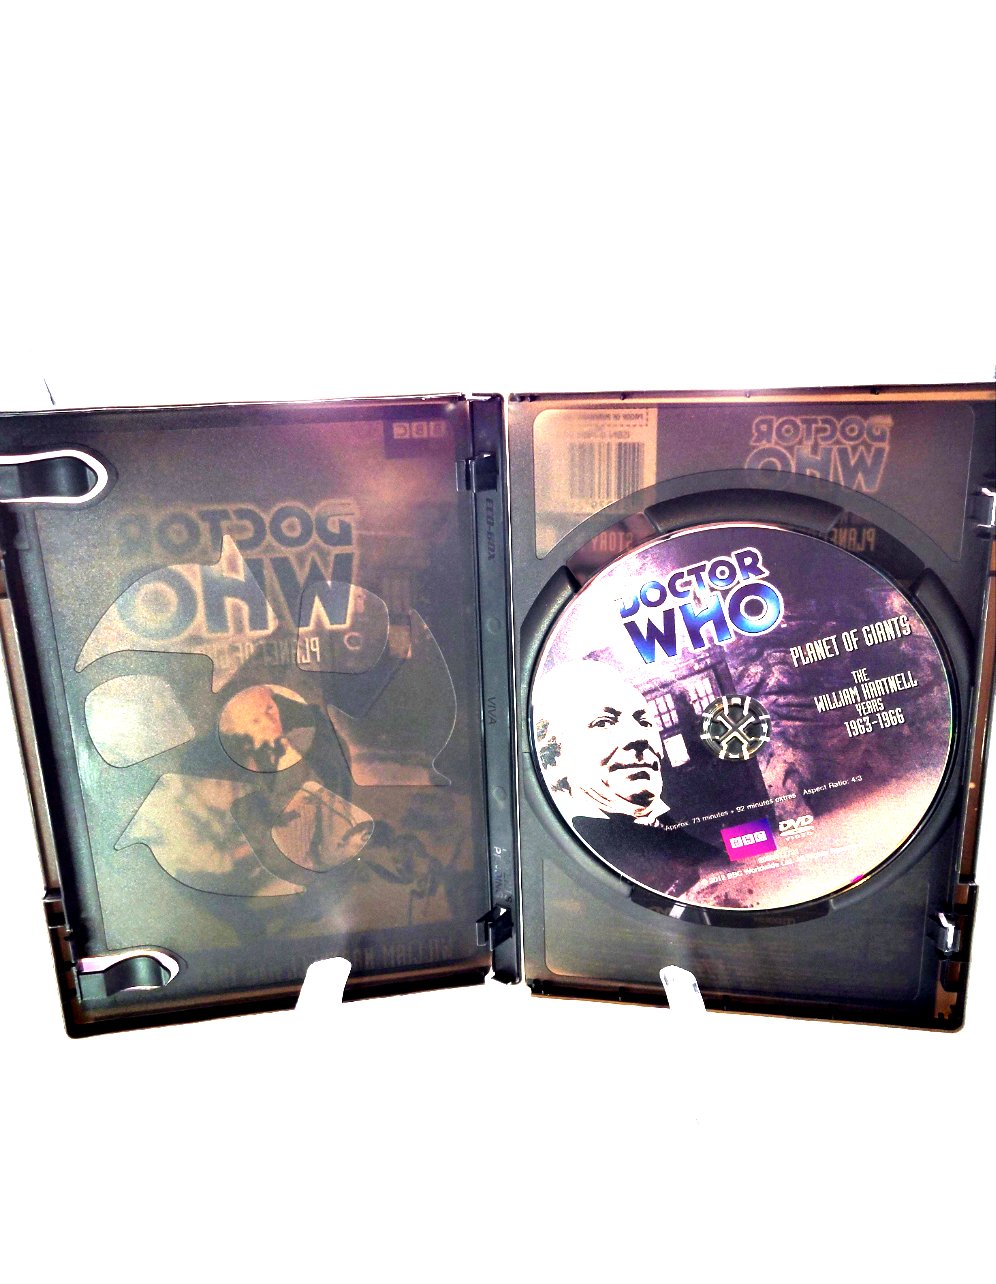 BBC Video Doctor Who Planet of Giants DVD